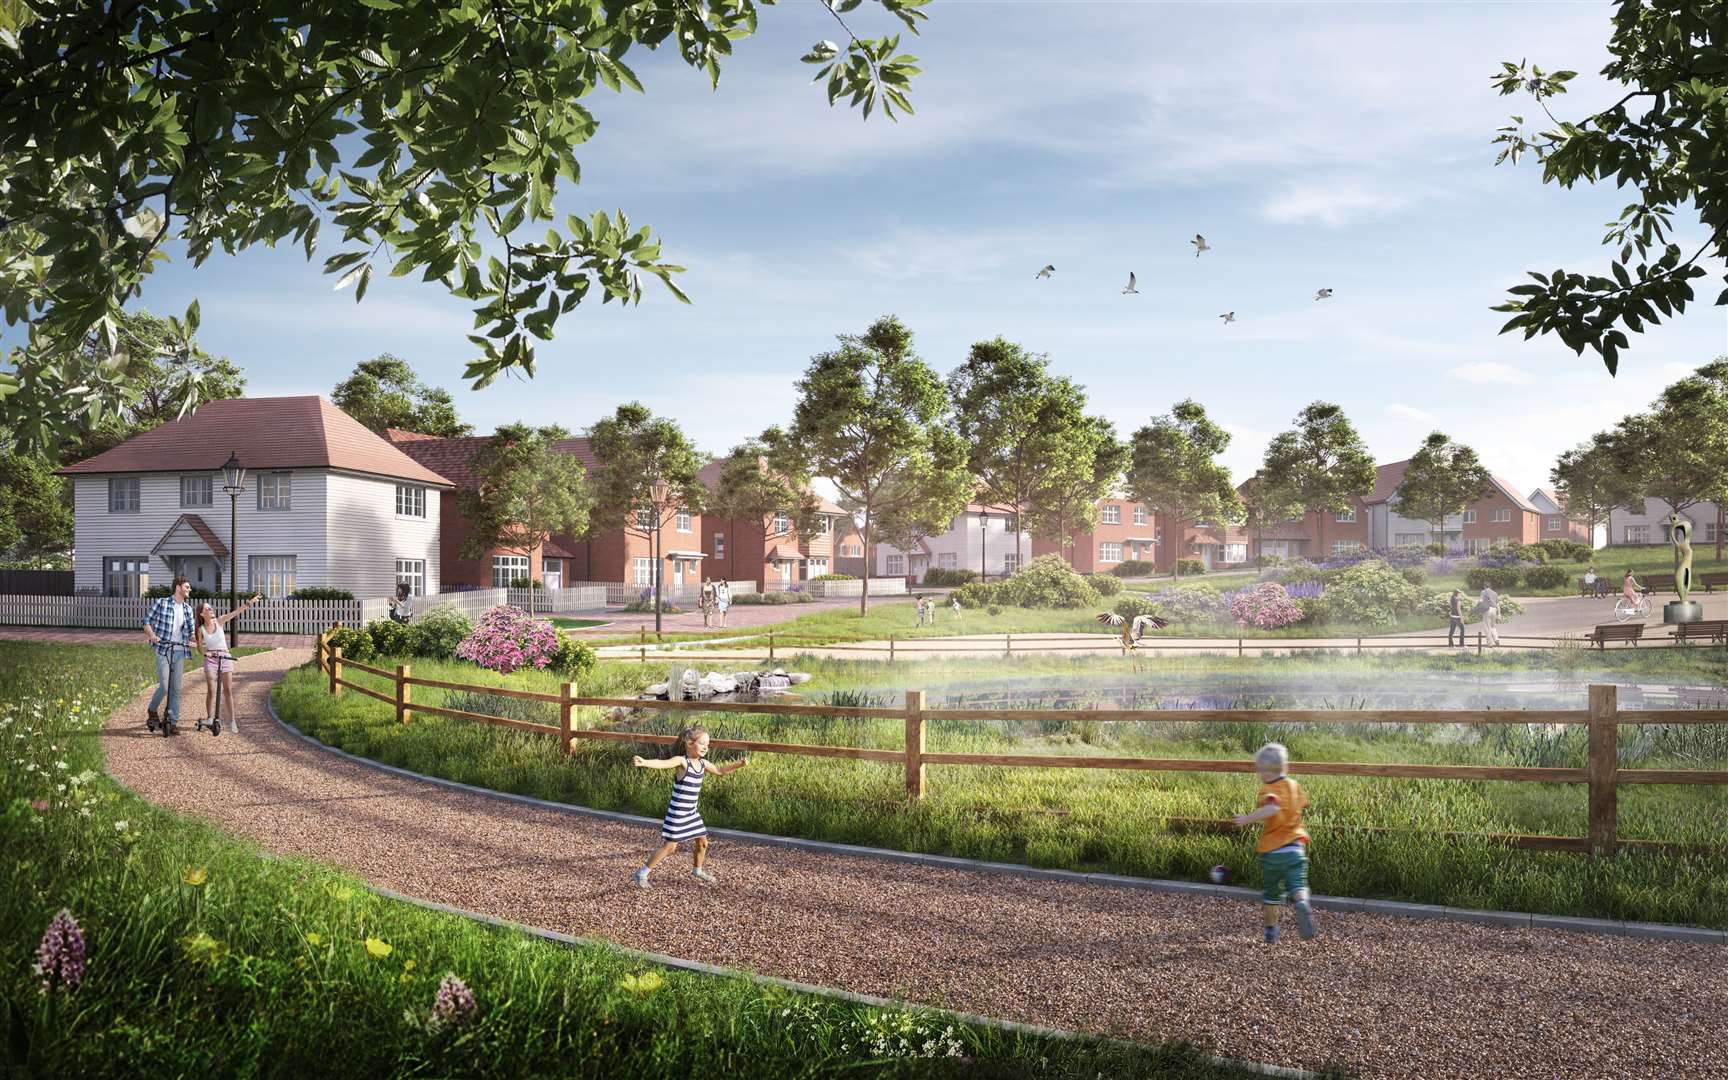 How the Large Burton development in Ashford could look